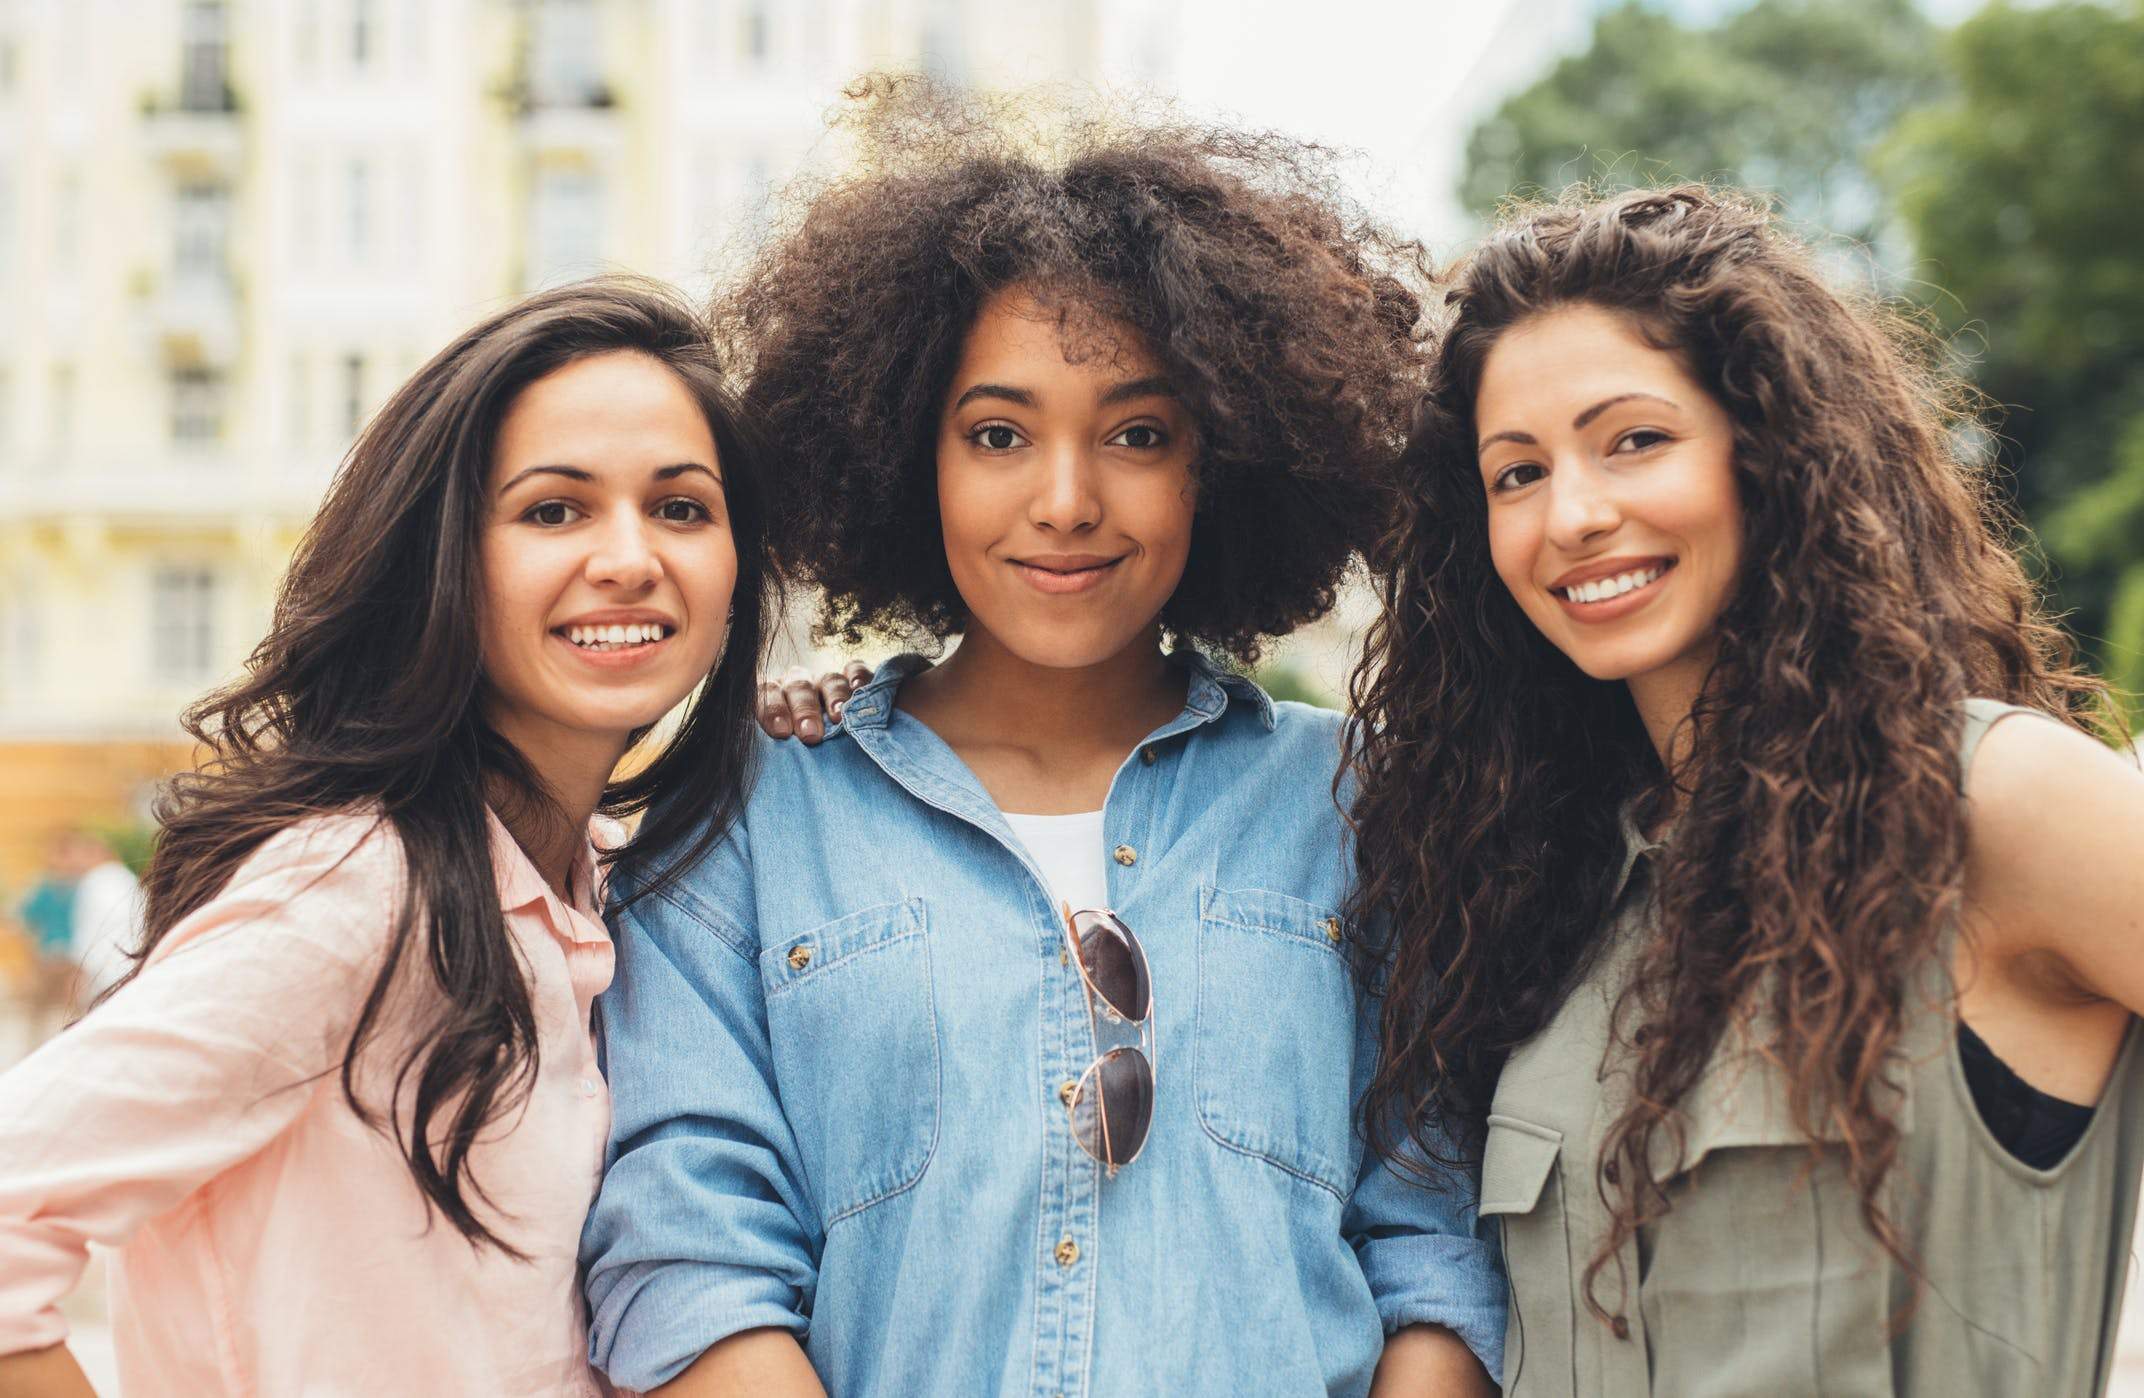 Can Female Friendships Improve Your Health?